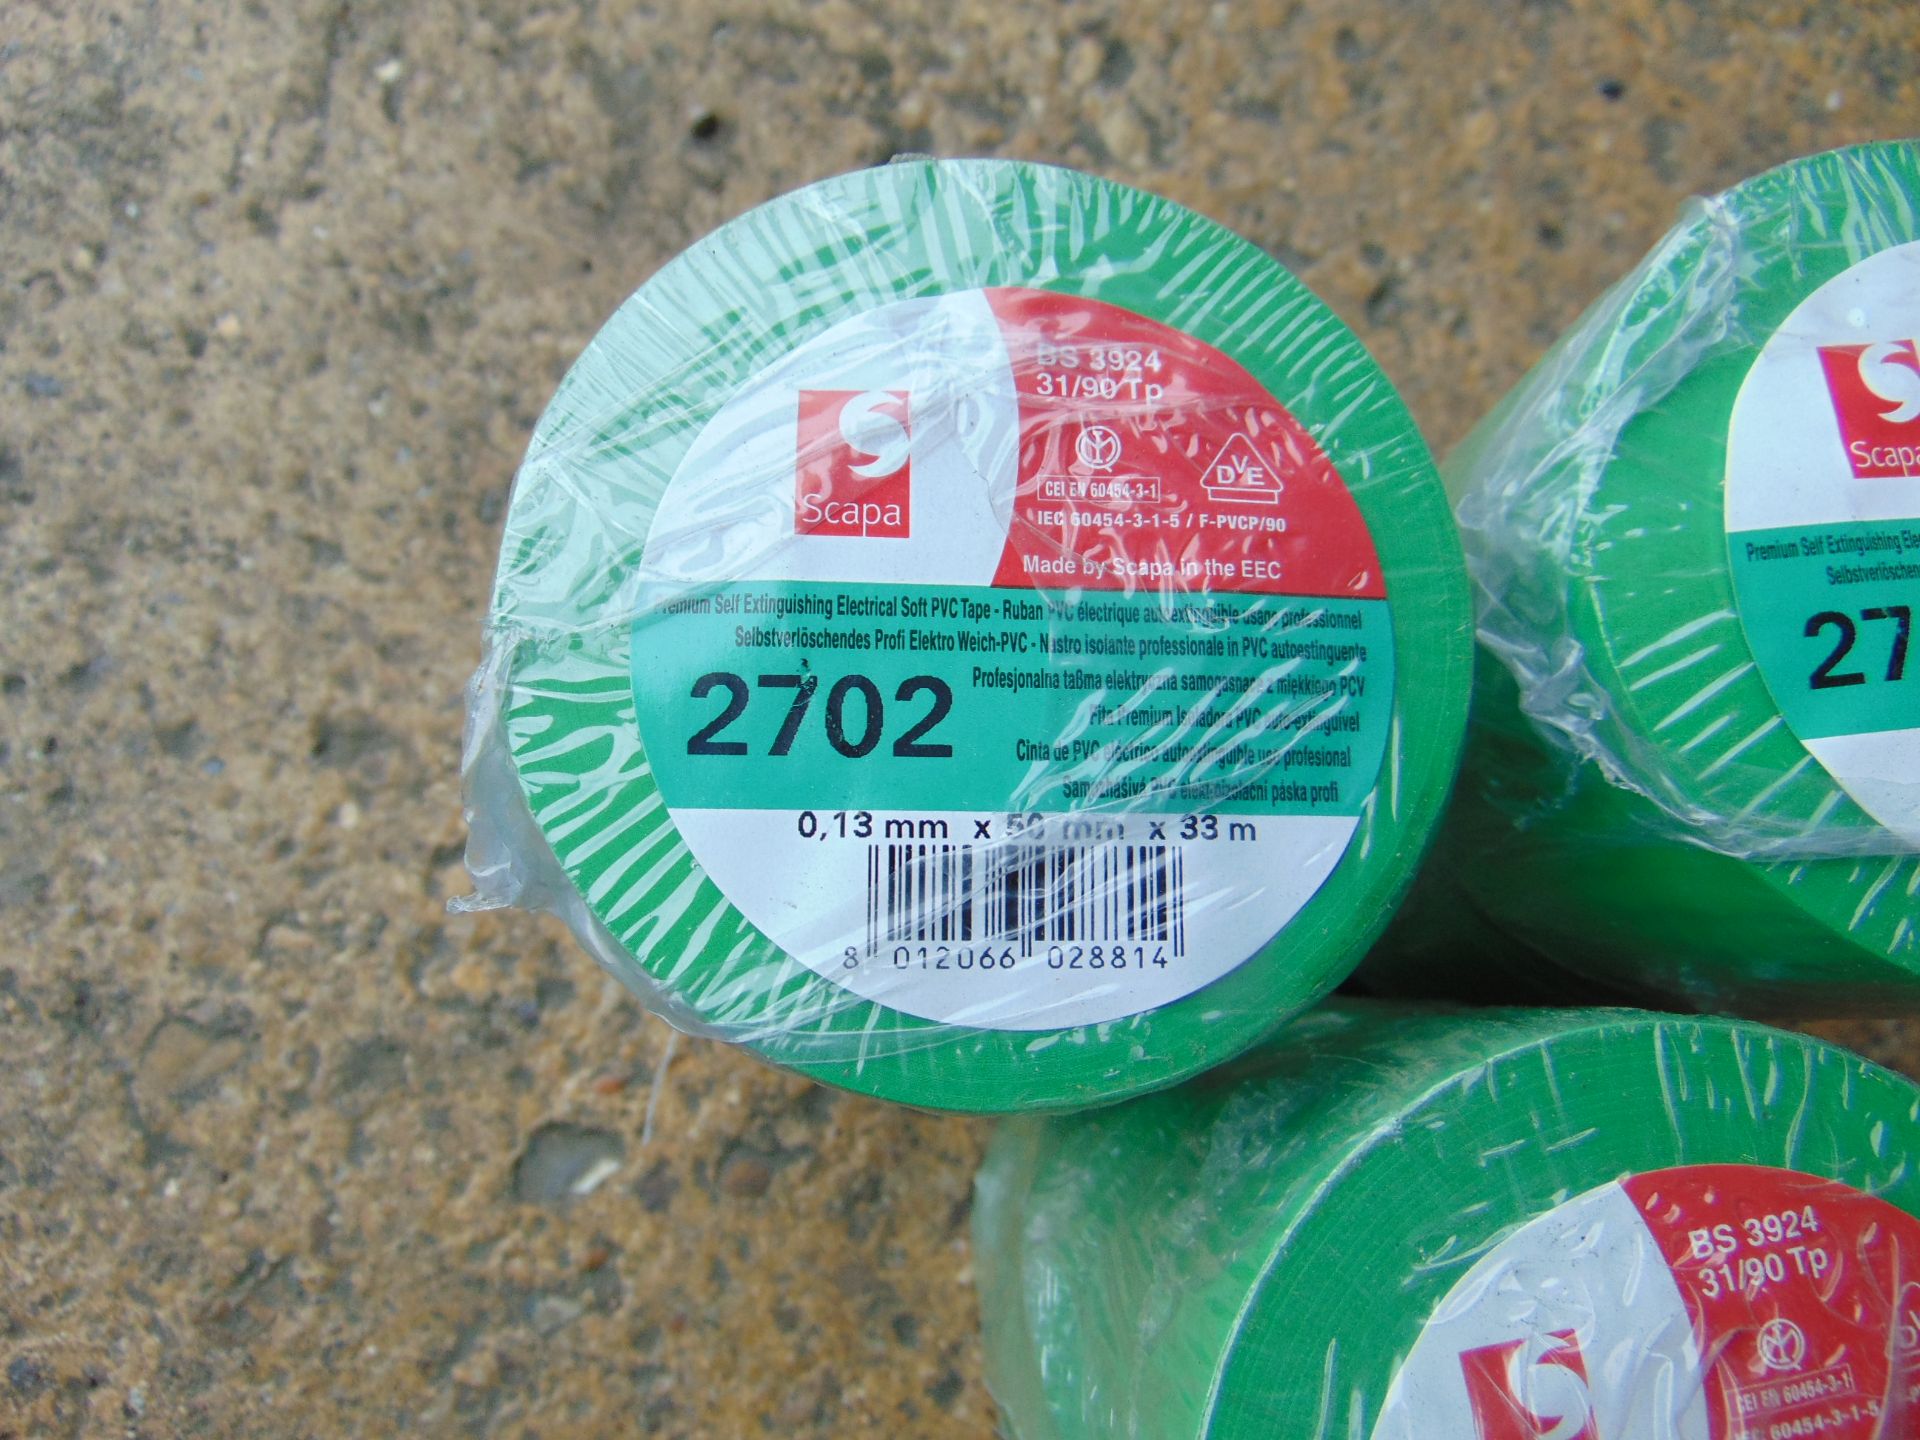 9 x SCAPA 2702 GREEN TAPE 33m LONG - Image 2 of 2